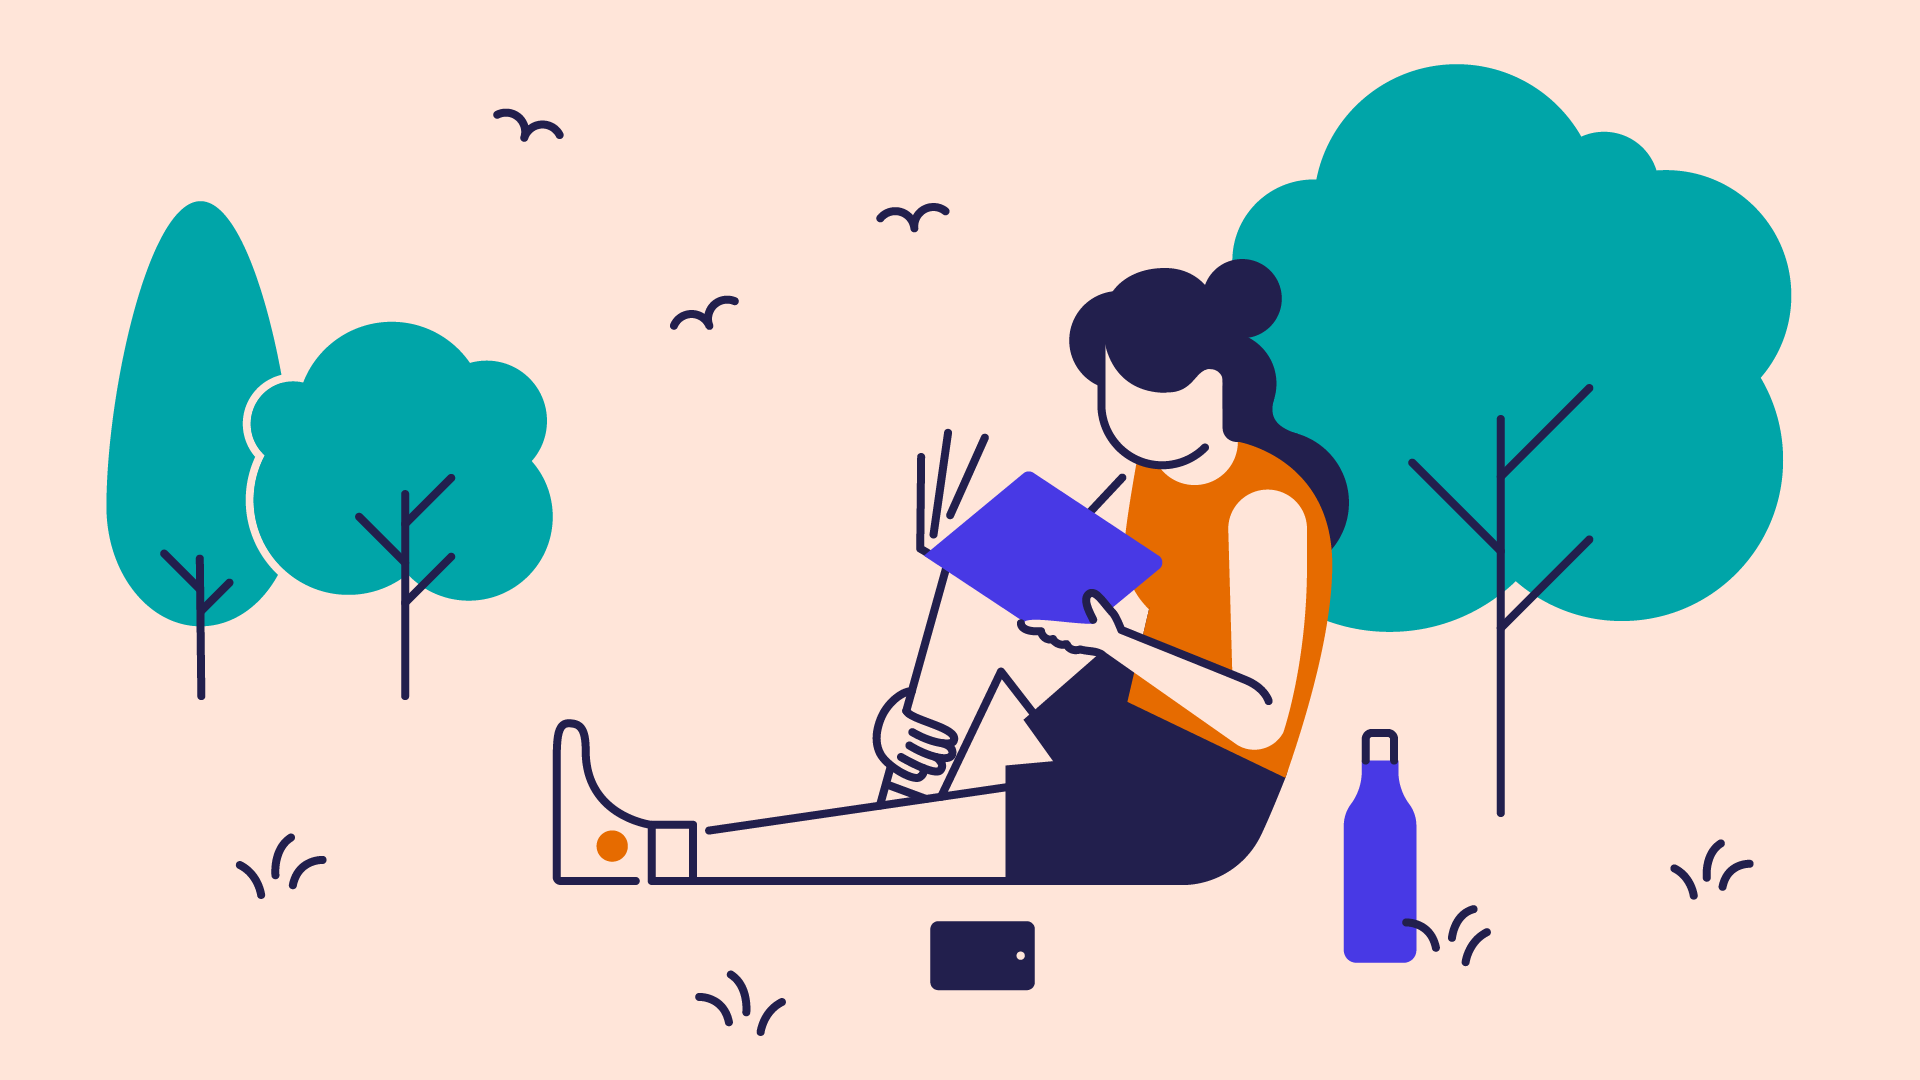 An illustration of a person sat reading under a tree